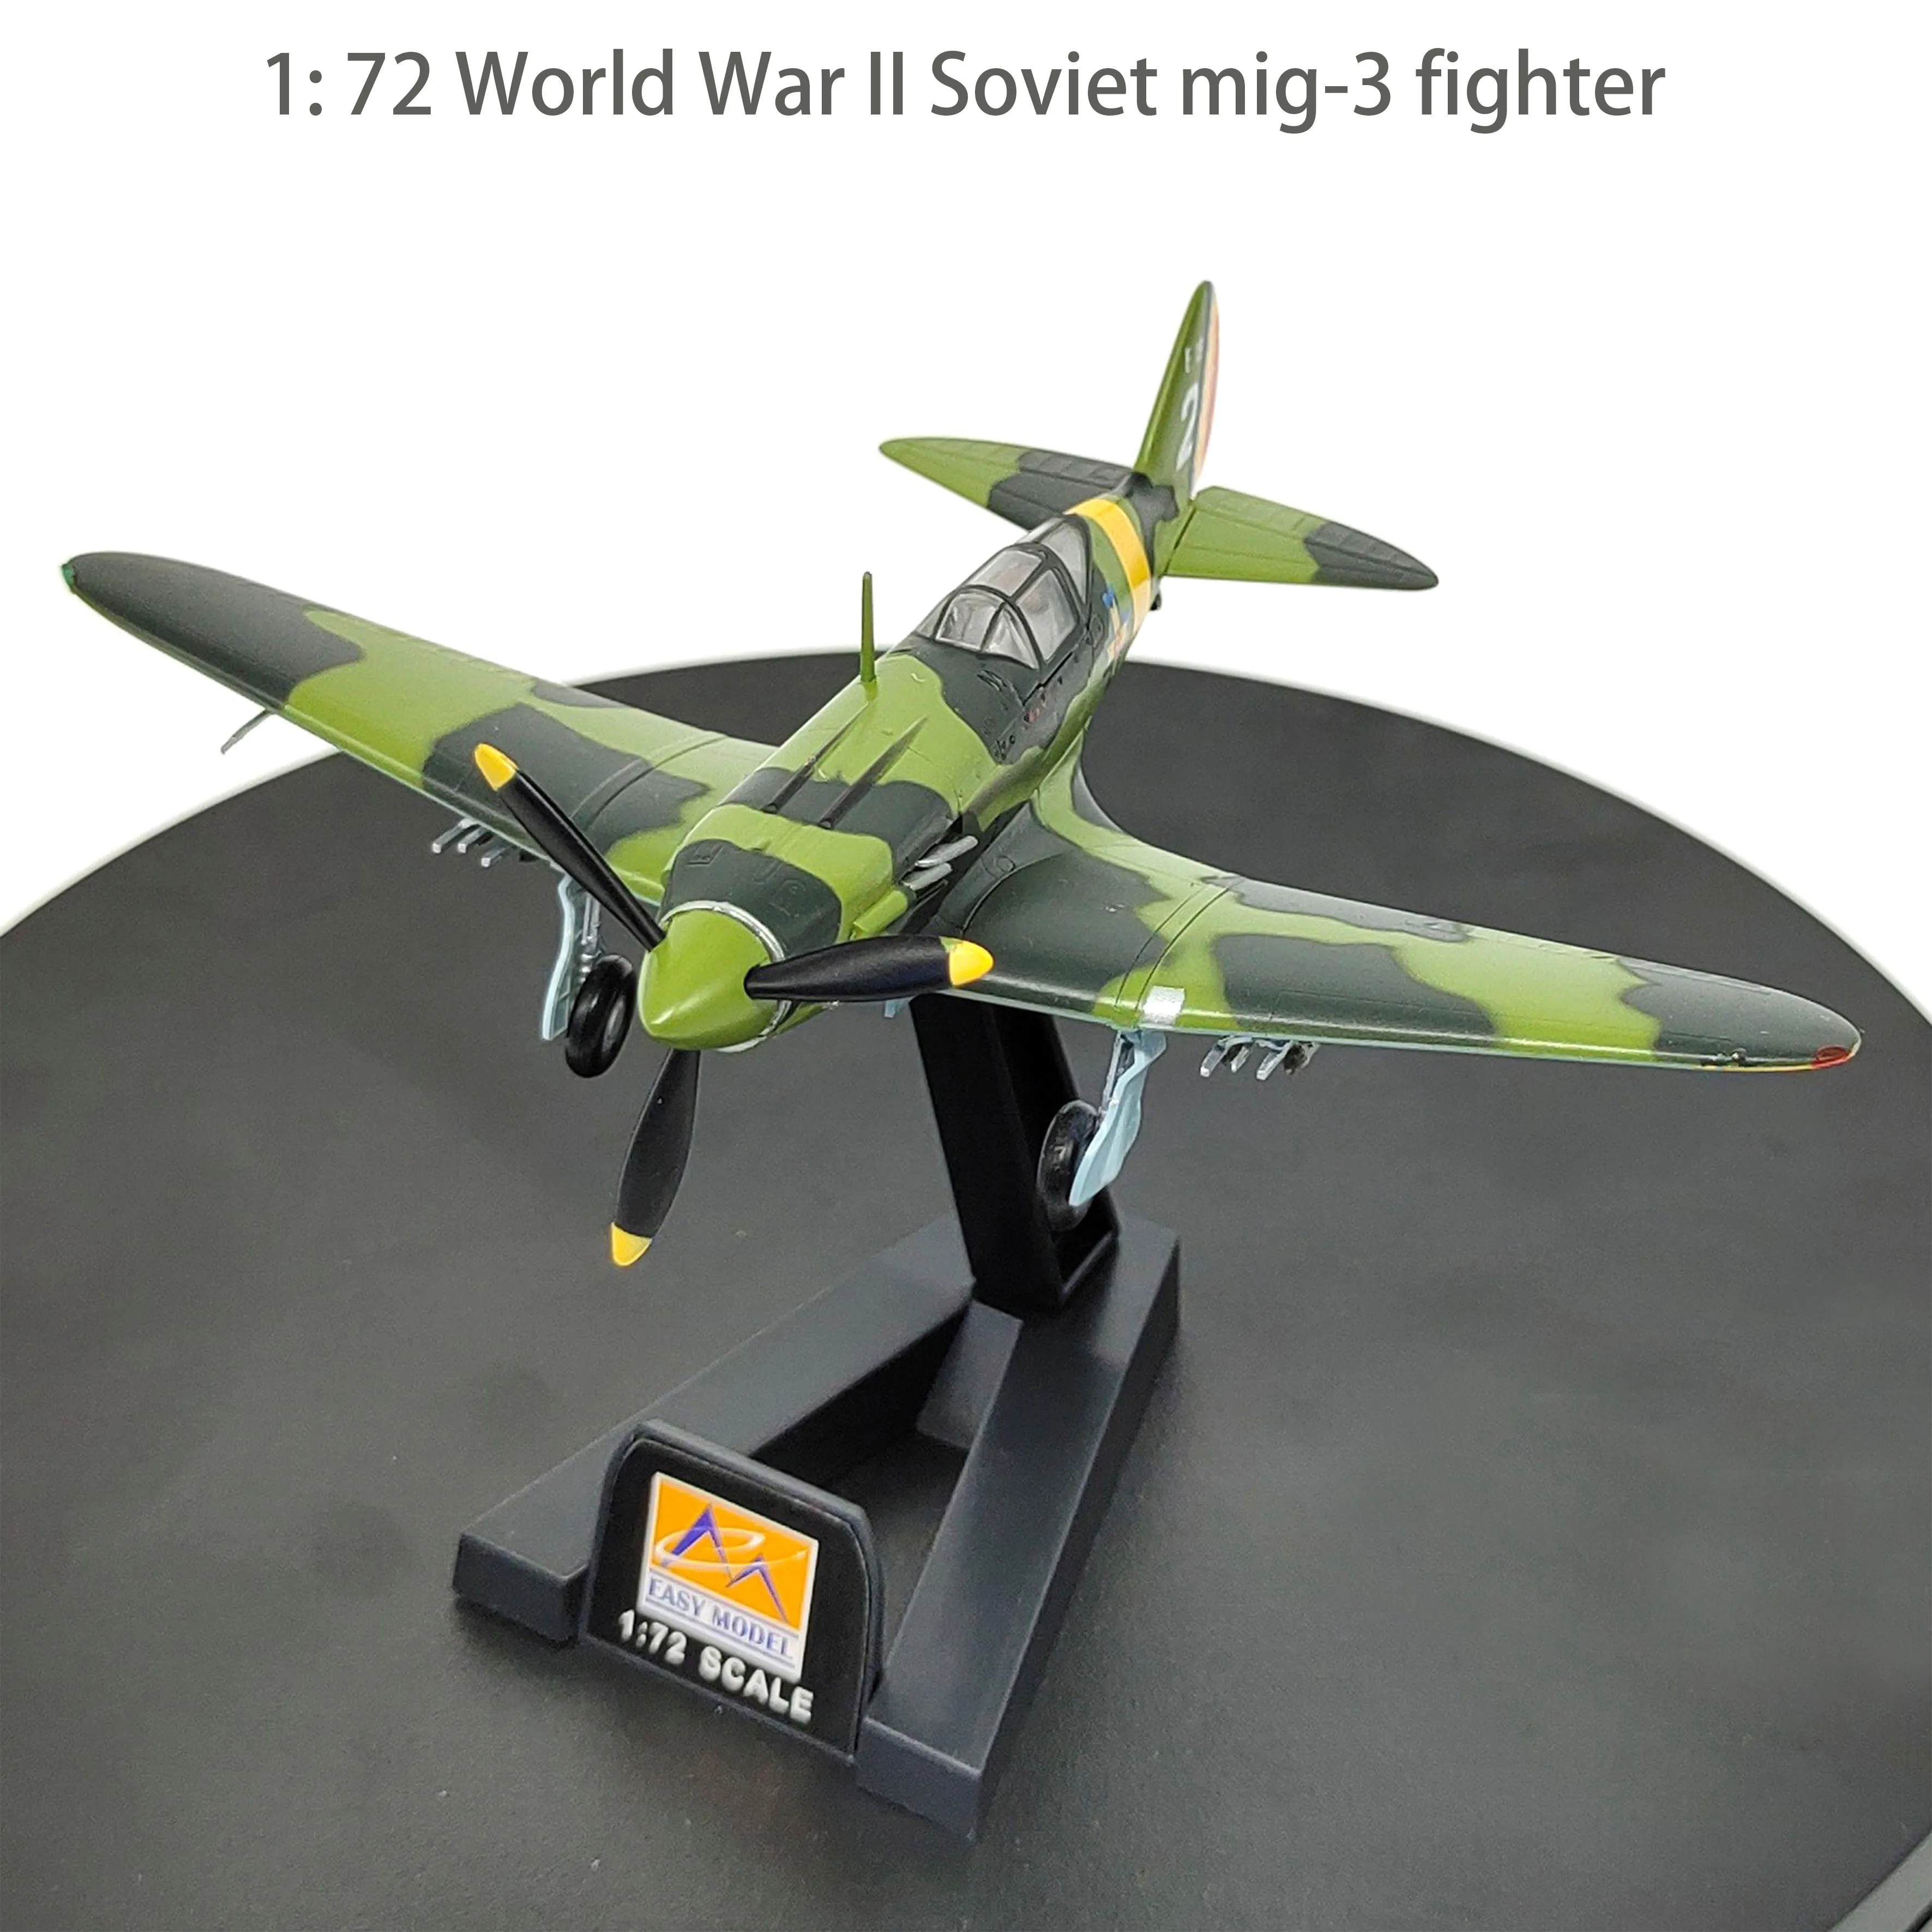 

1: 72 World War II Soviet mig-3 fighter Romanian Air Force Finished product model 37222